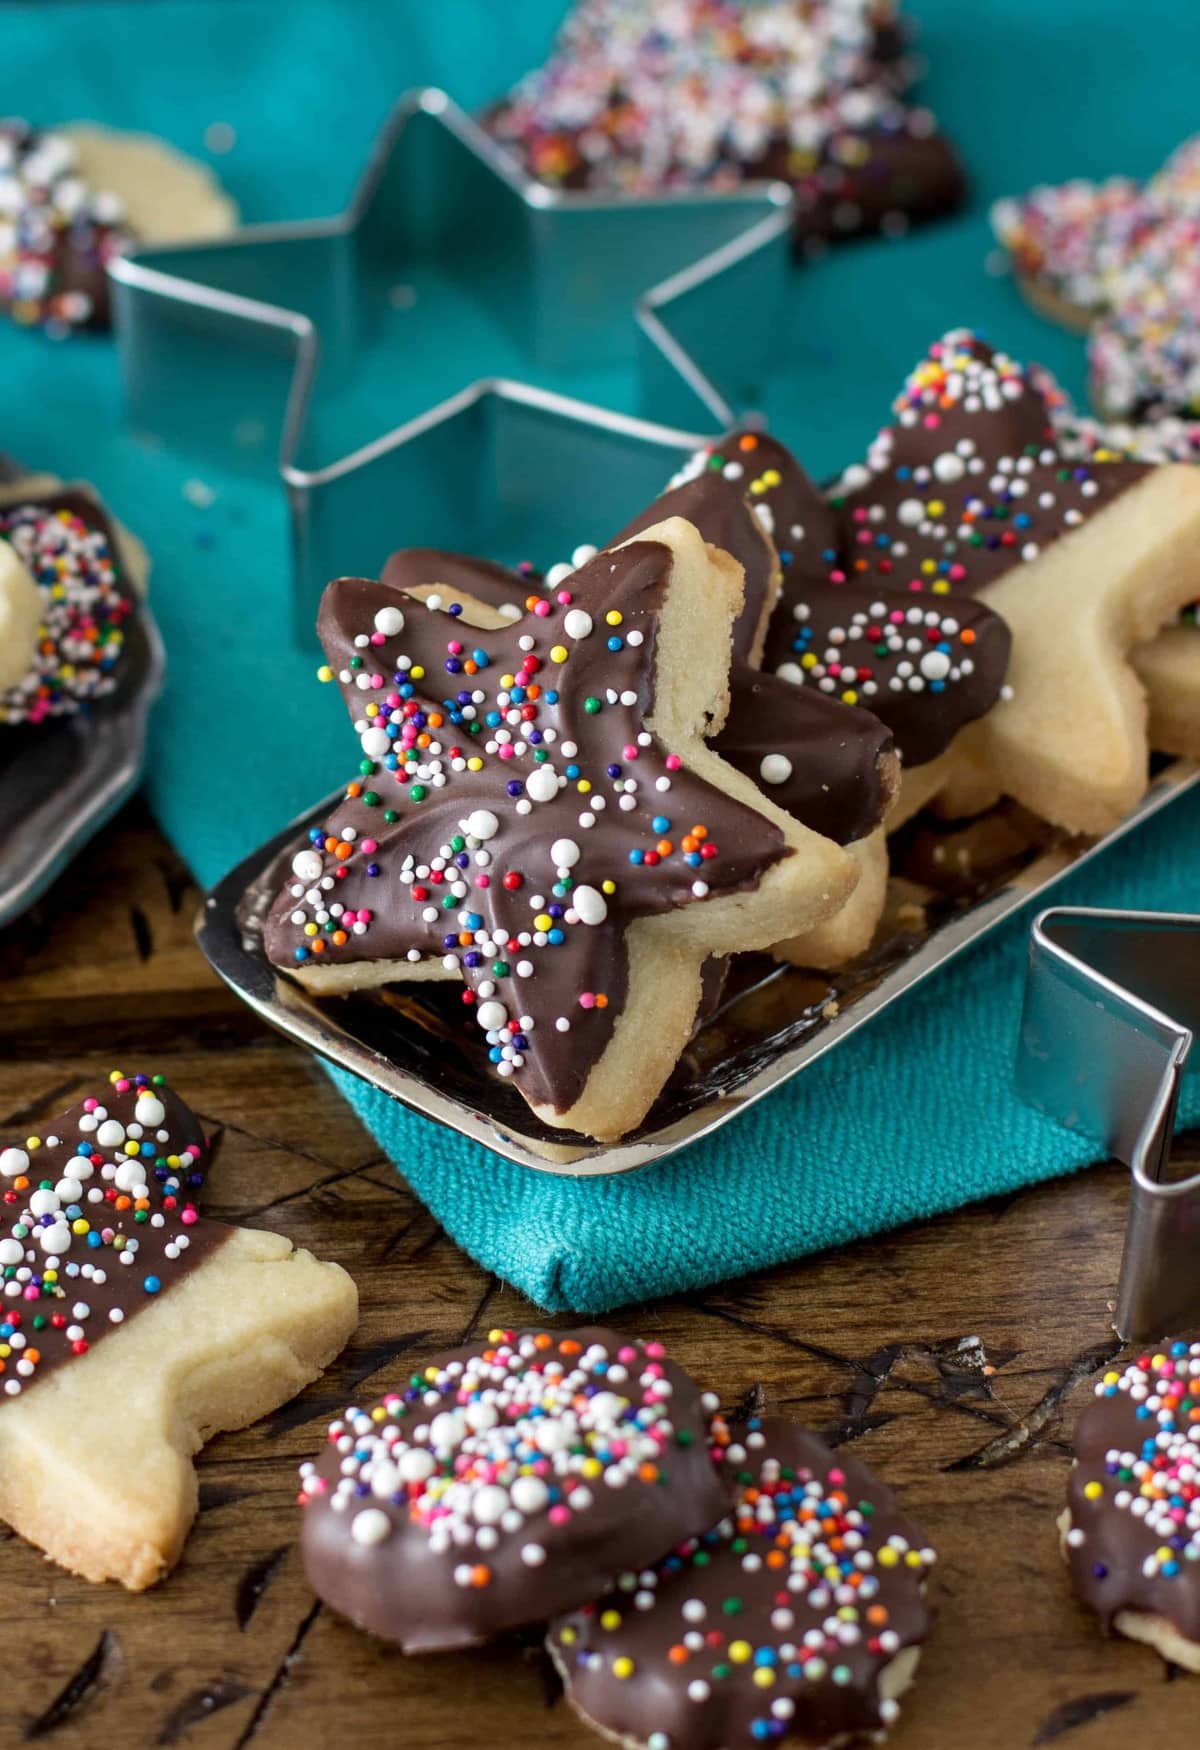 Chocolate Dipped Chocolate Sugar Cookies (a Fast and Easy Christmas Cookie)